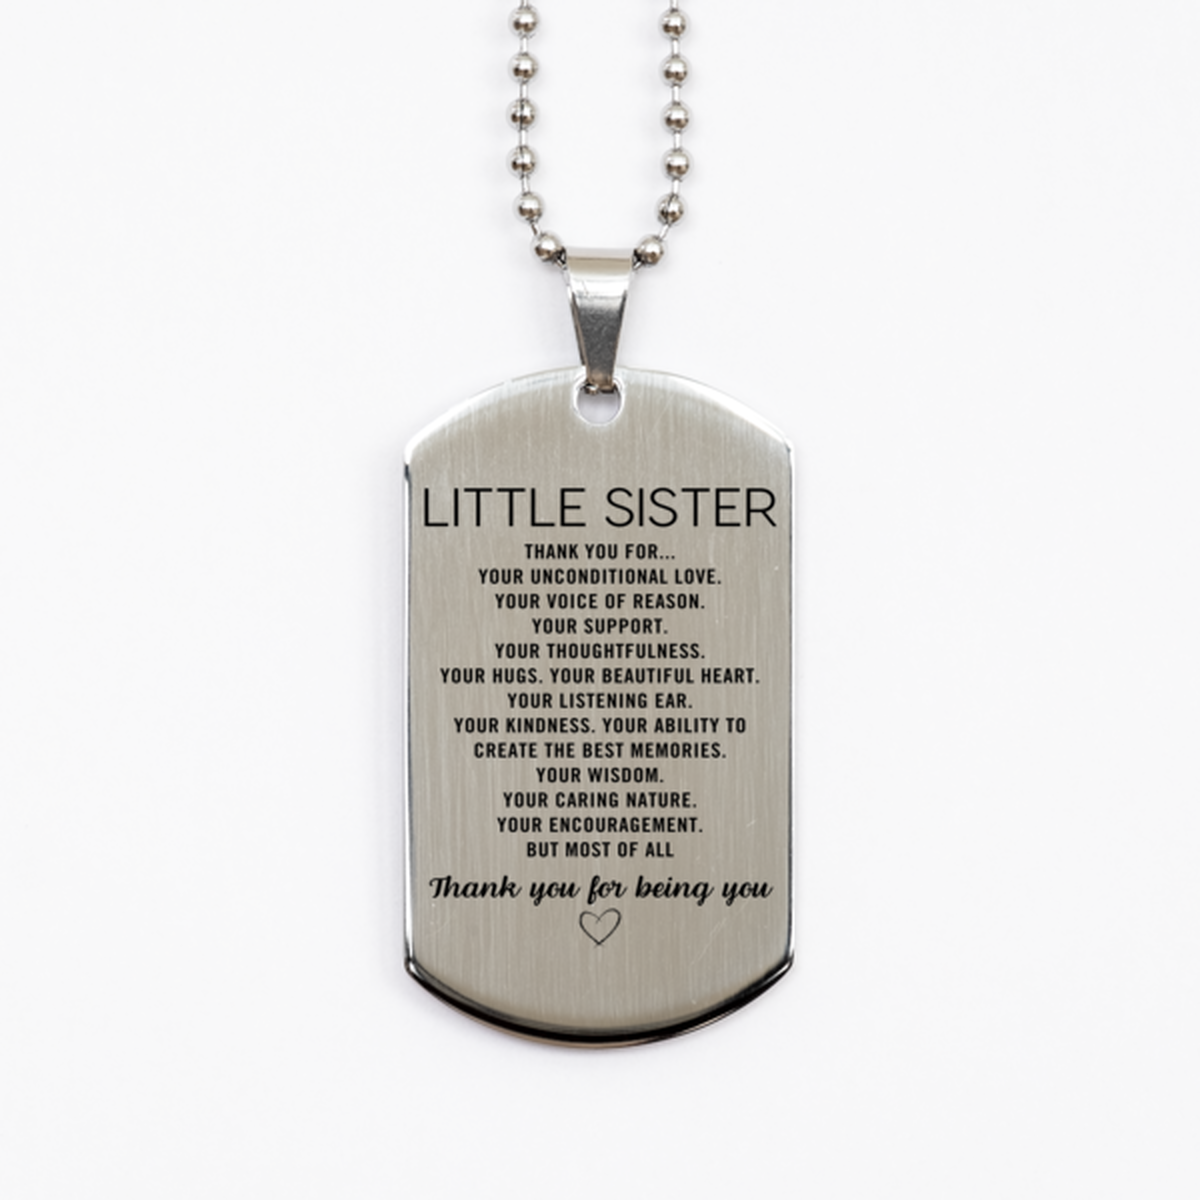 Little Sister Silver Dog Tag Custom, Engraved Gifts For Little Sister Christmas Graduation Birthday Gifts for Men Women Little Sister Thank you for Your unconditional love